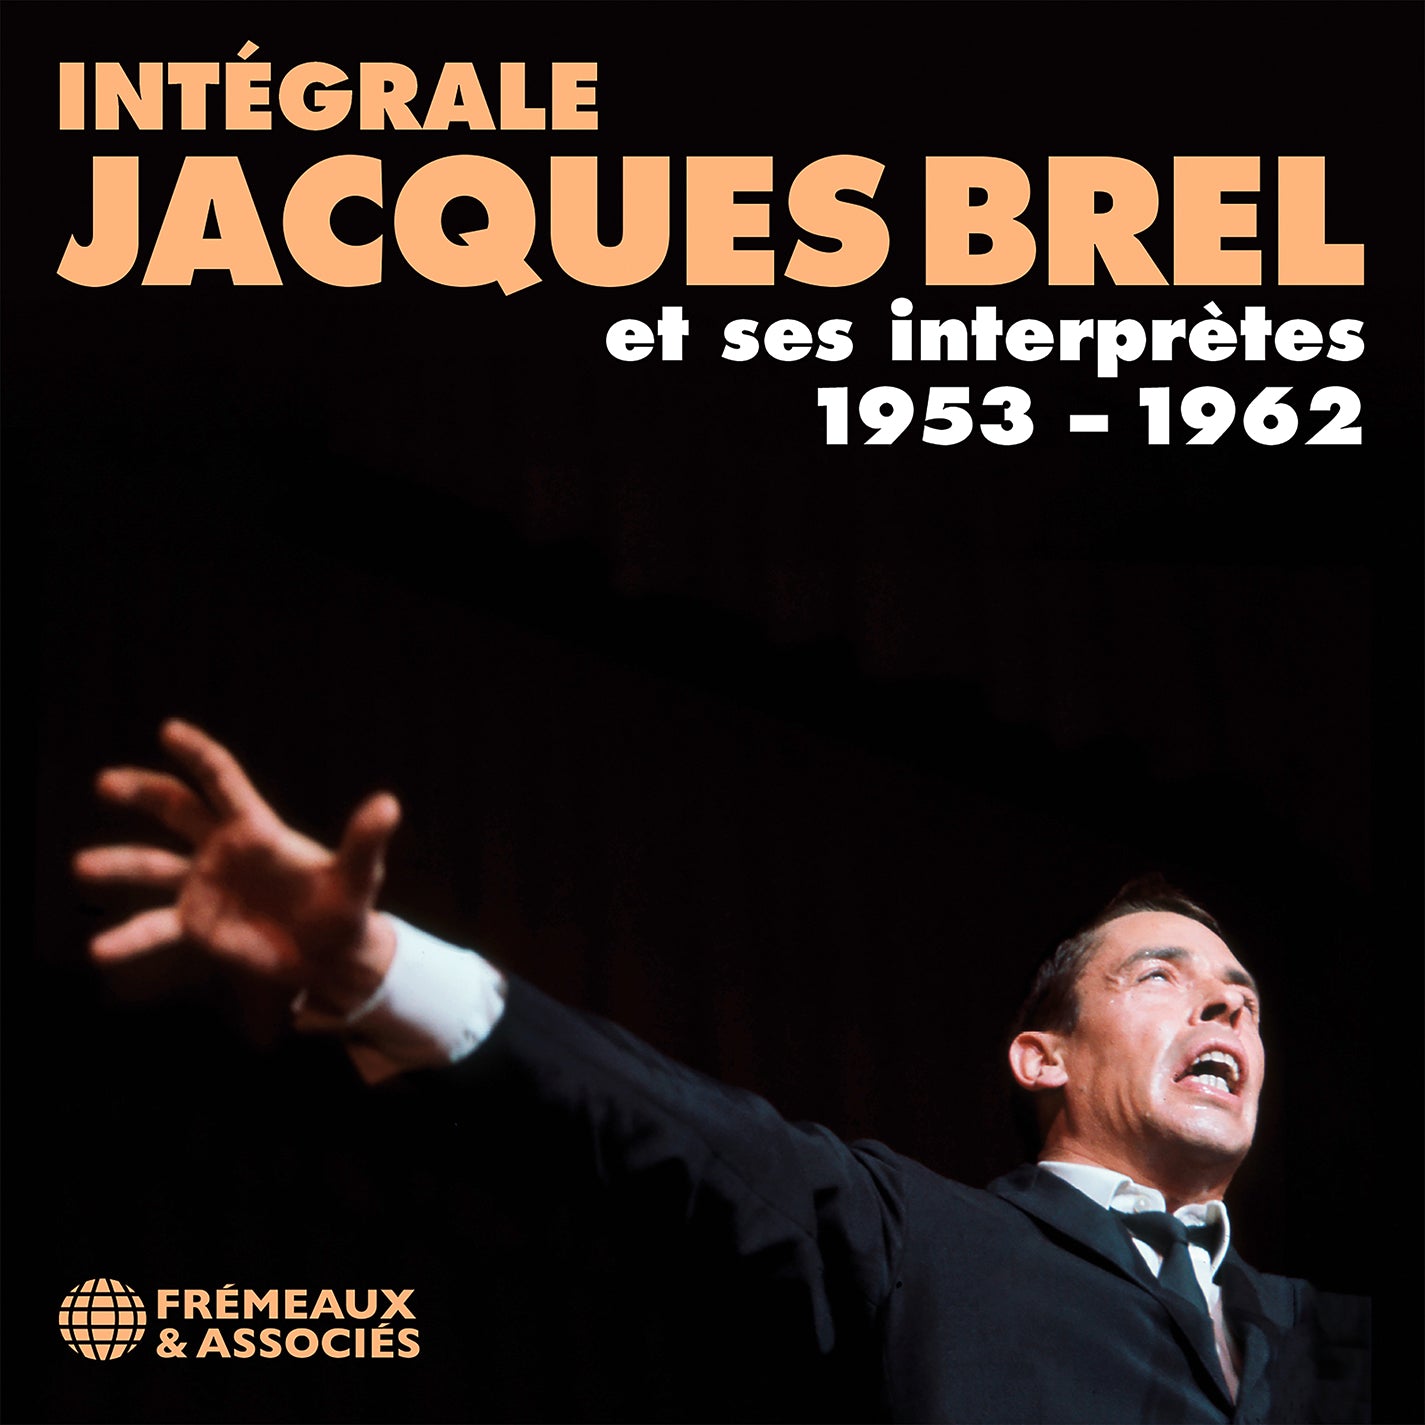 The Complete Jacques Brel & His Early Interpreters, 1953-1962